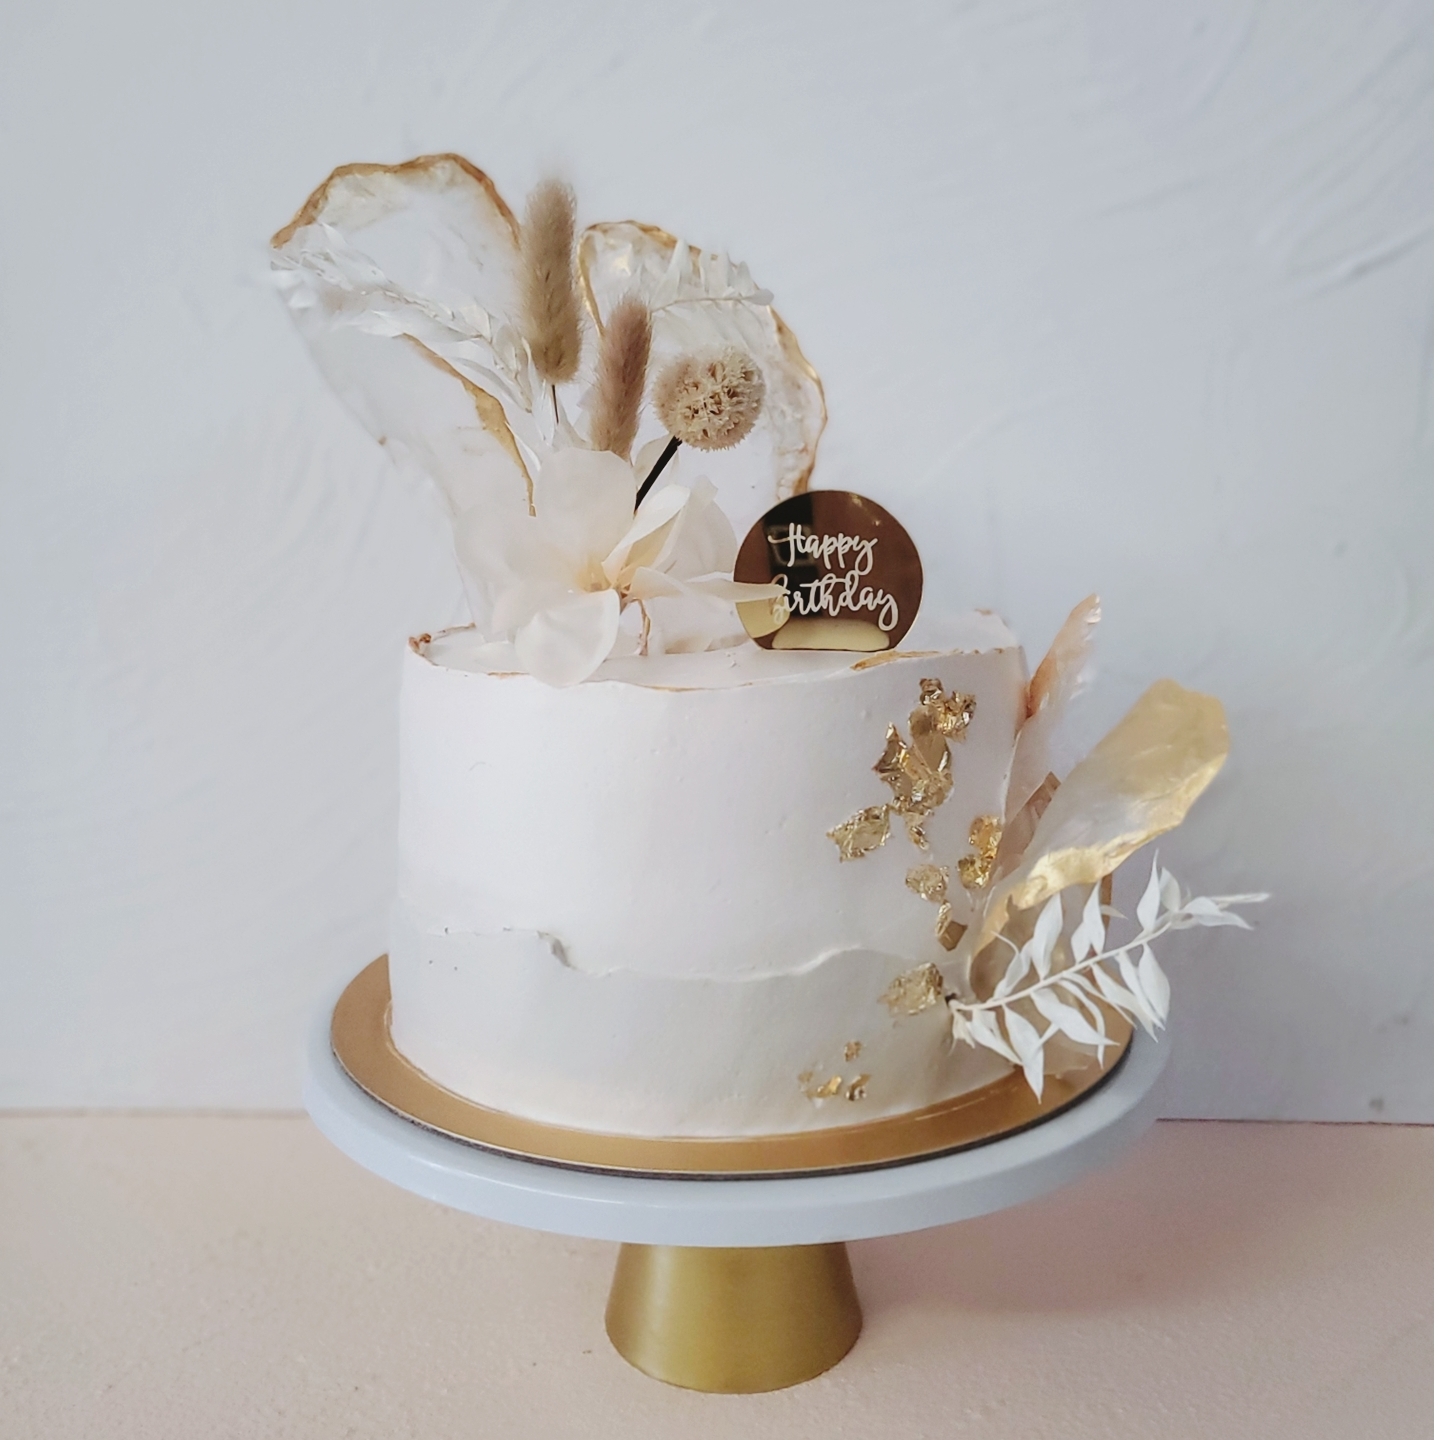 Boho Chic Themed Cake With Dried Flowers & Rice Paper Sails 